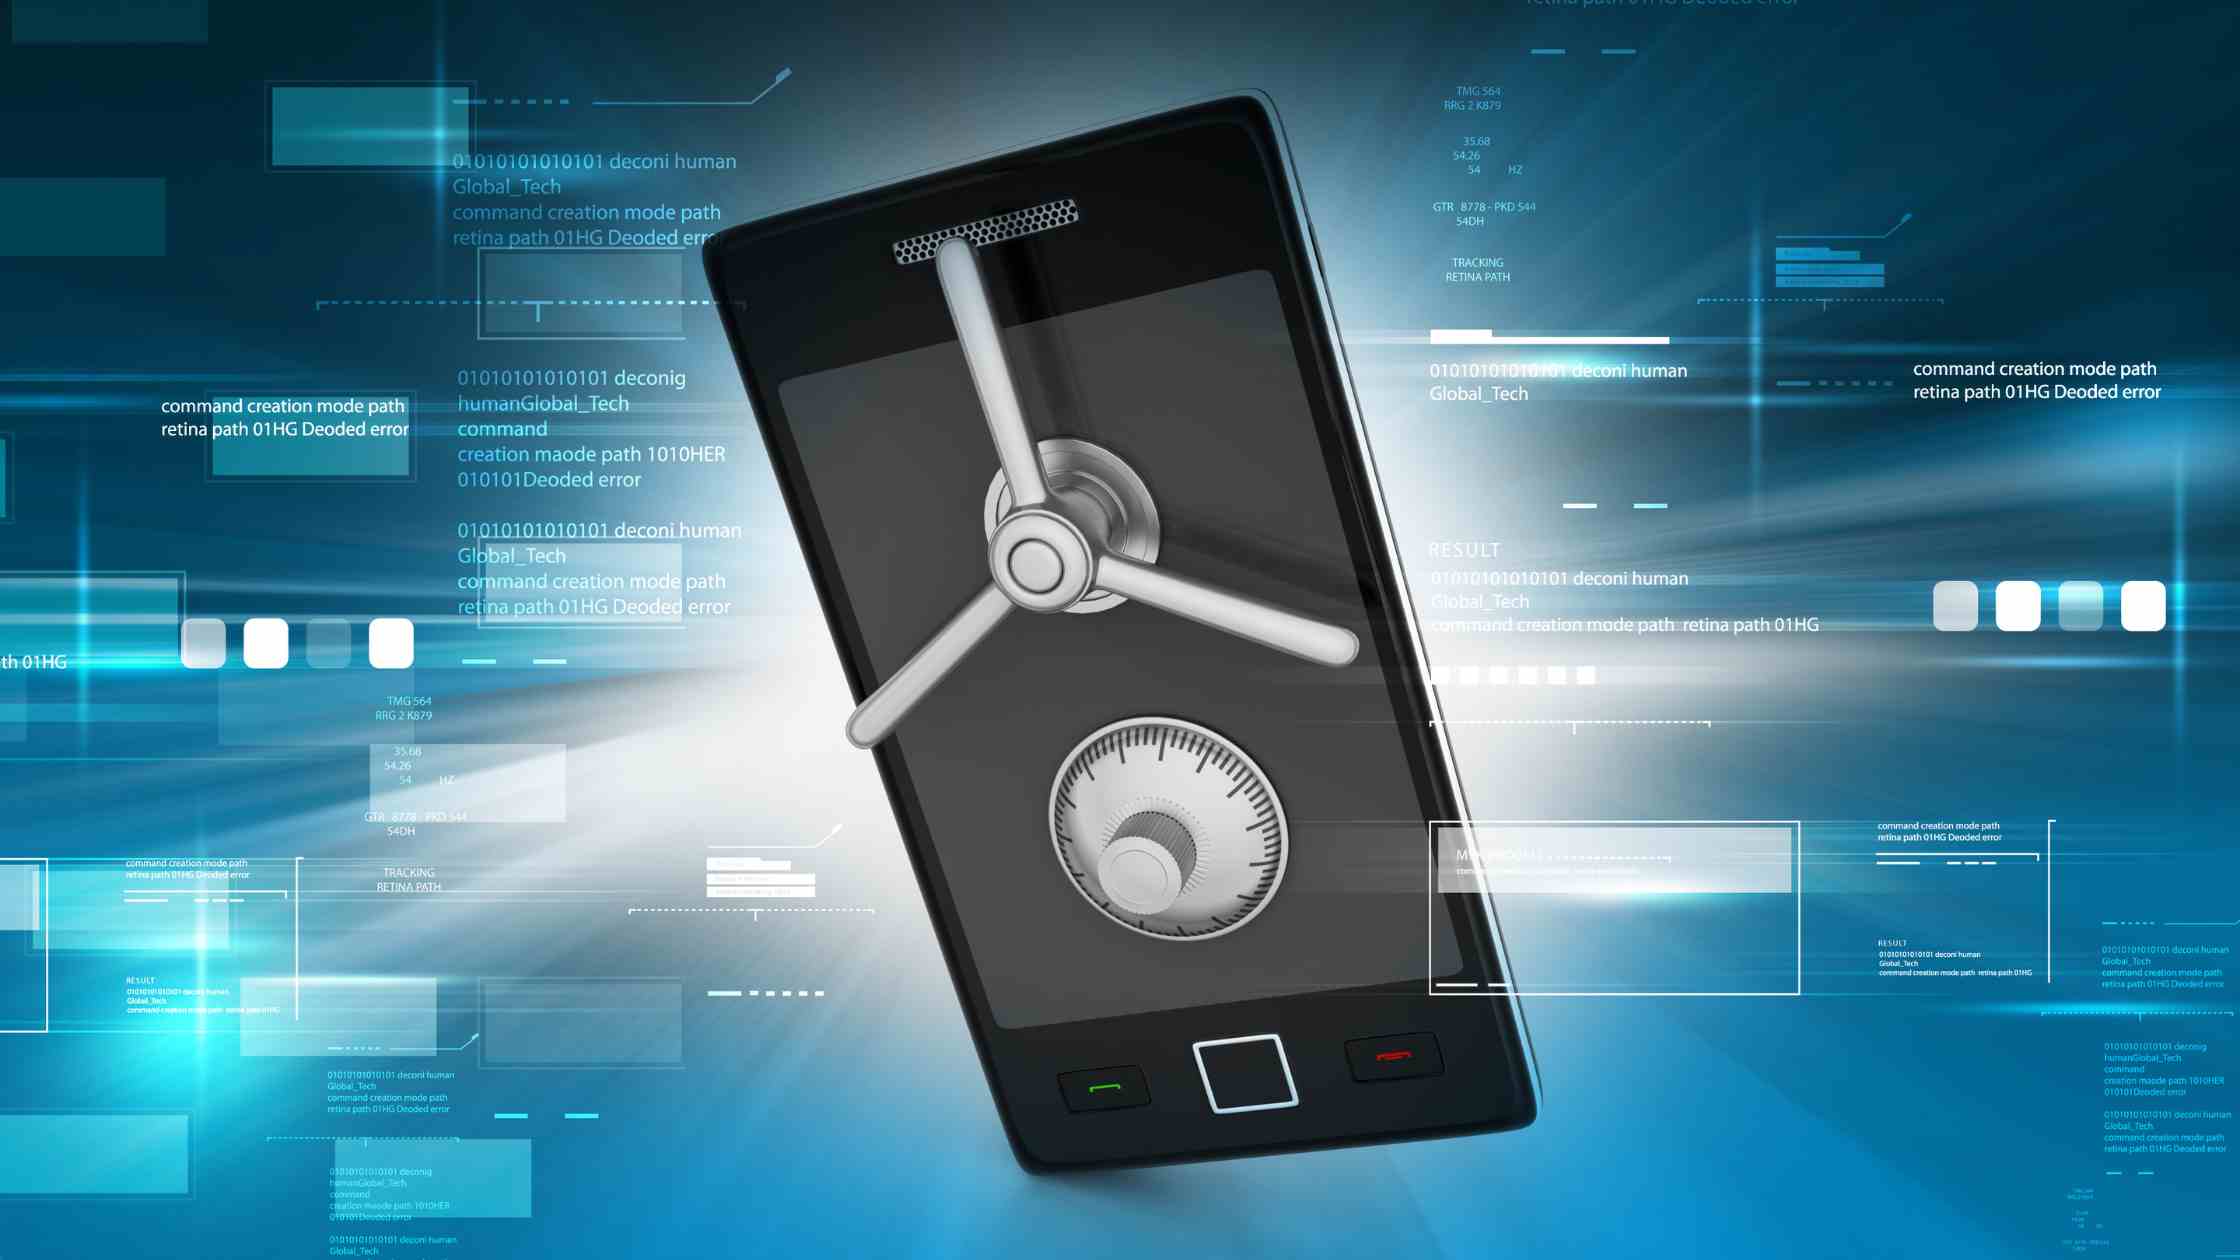 Mobile banking security concept; smartphone with bank vault style attachments